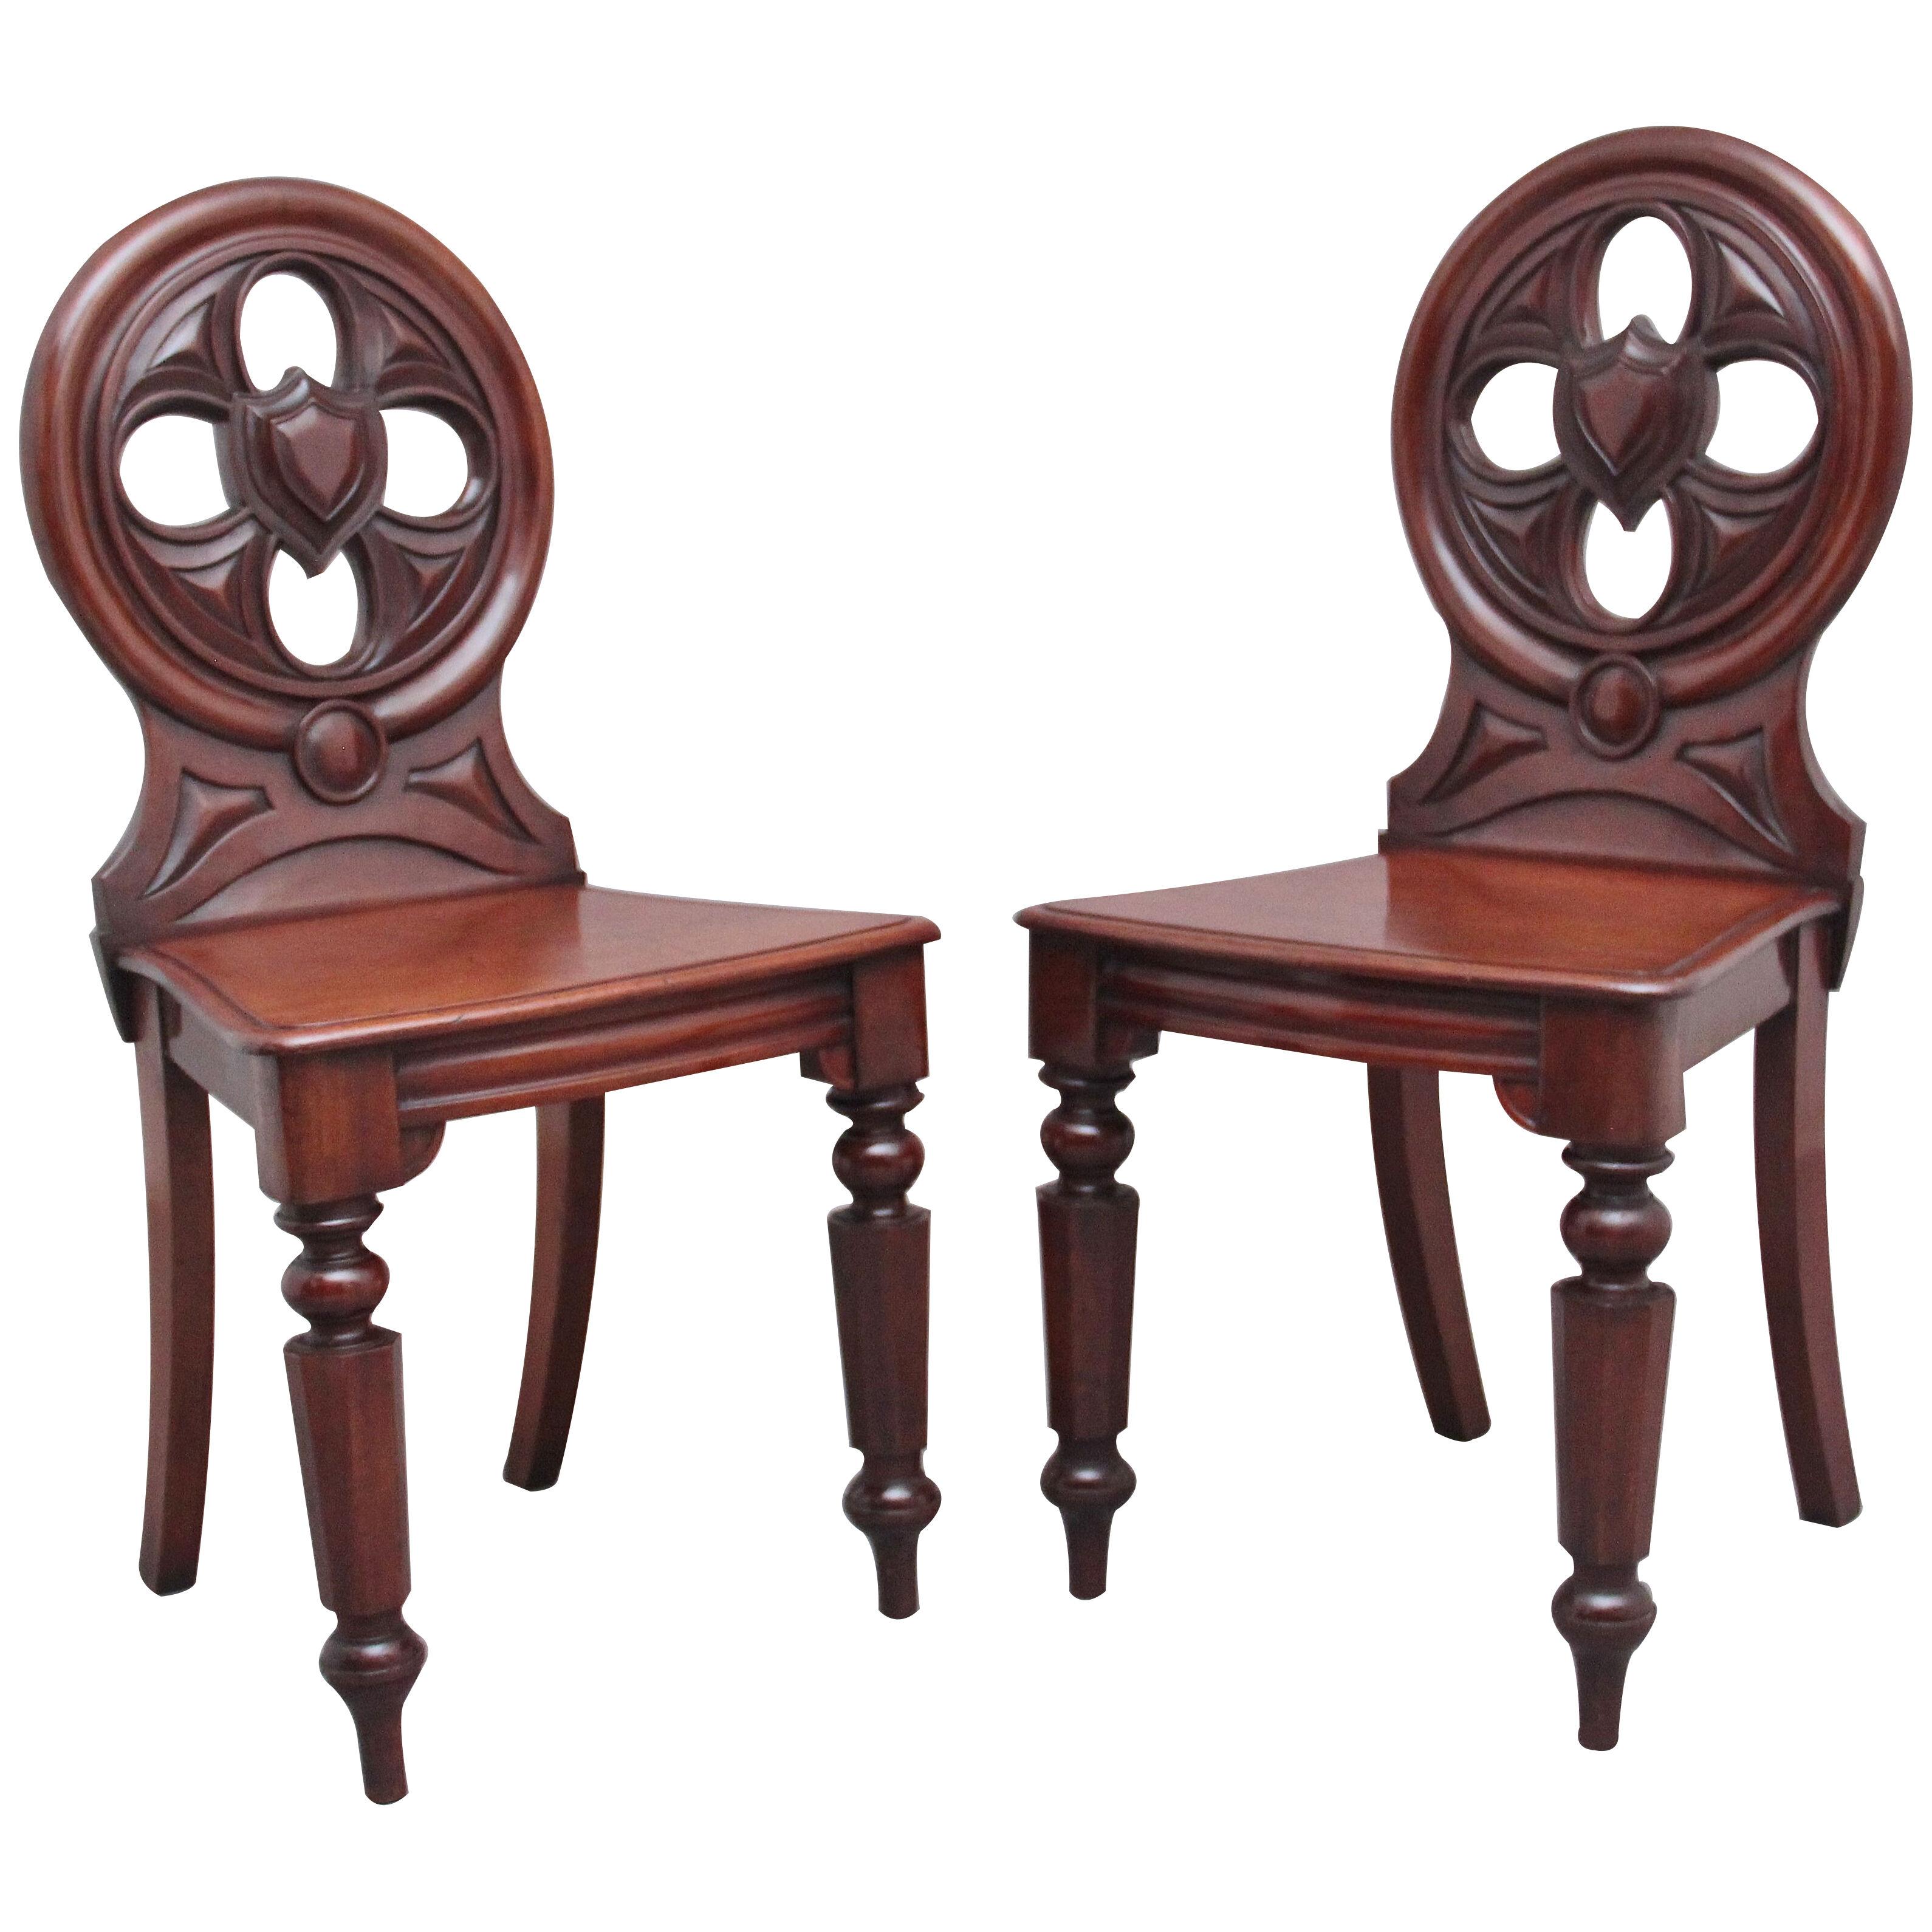 Pair of 19th Century antique mahogany hall chairs